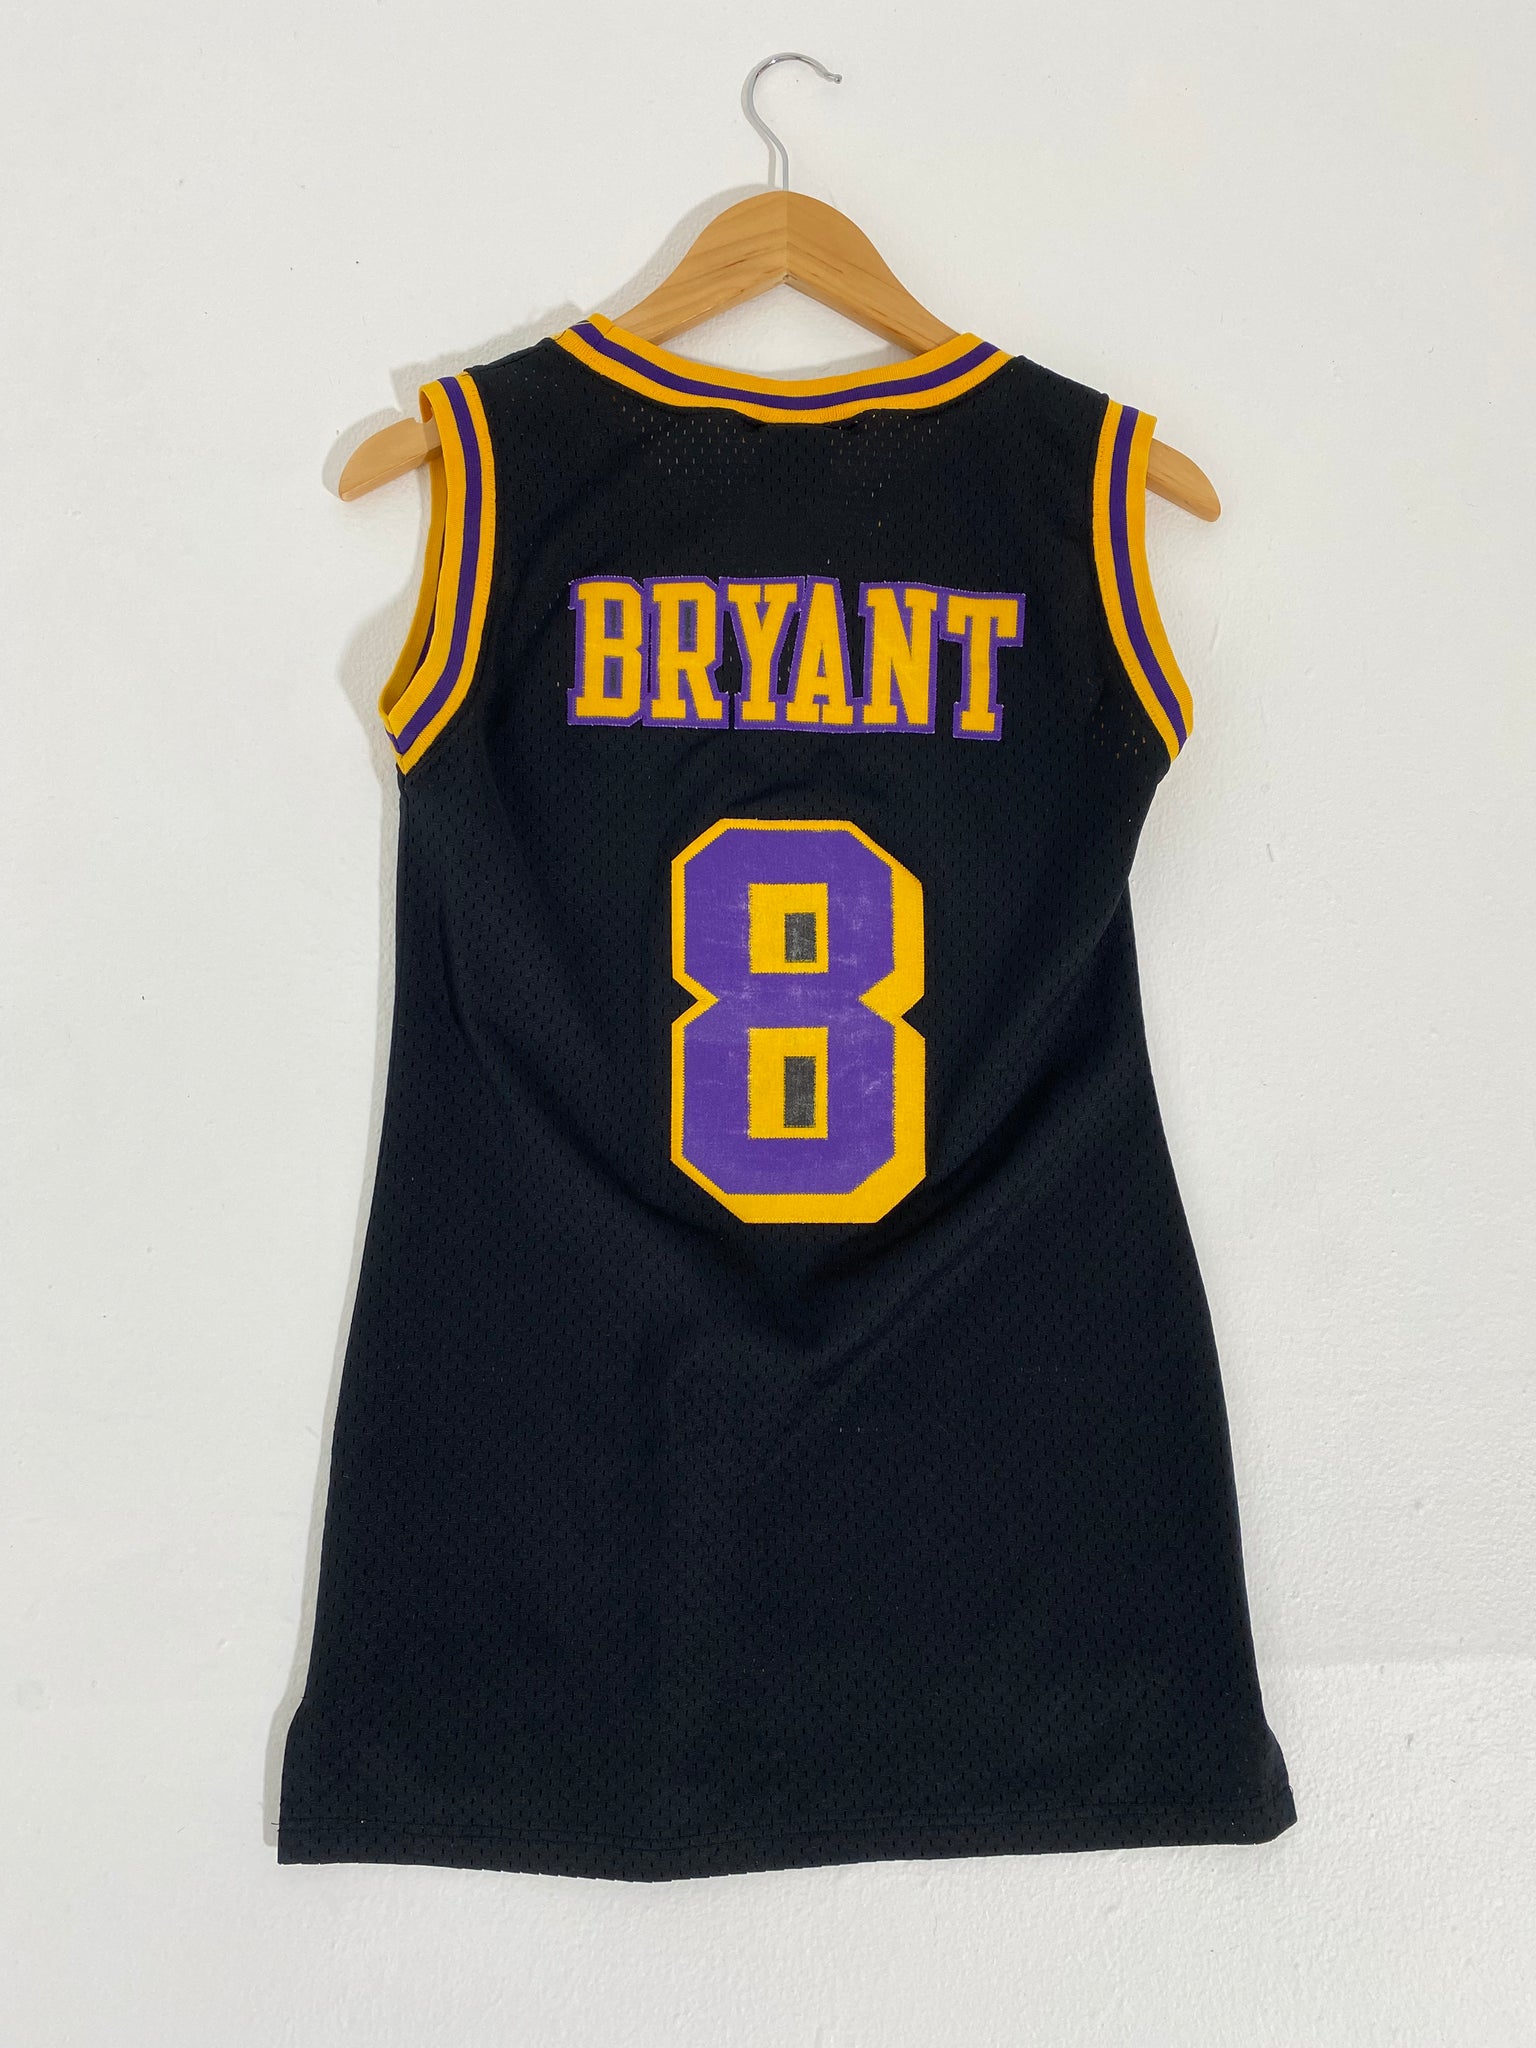 los angeles lakers youth jersey